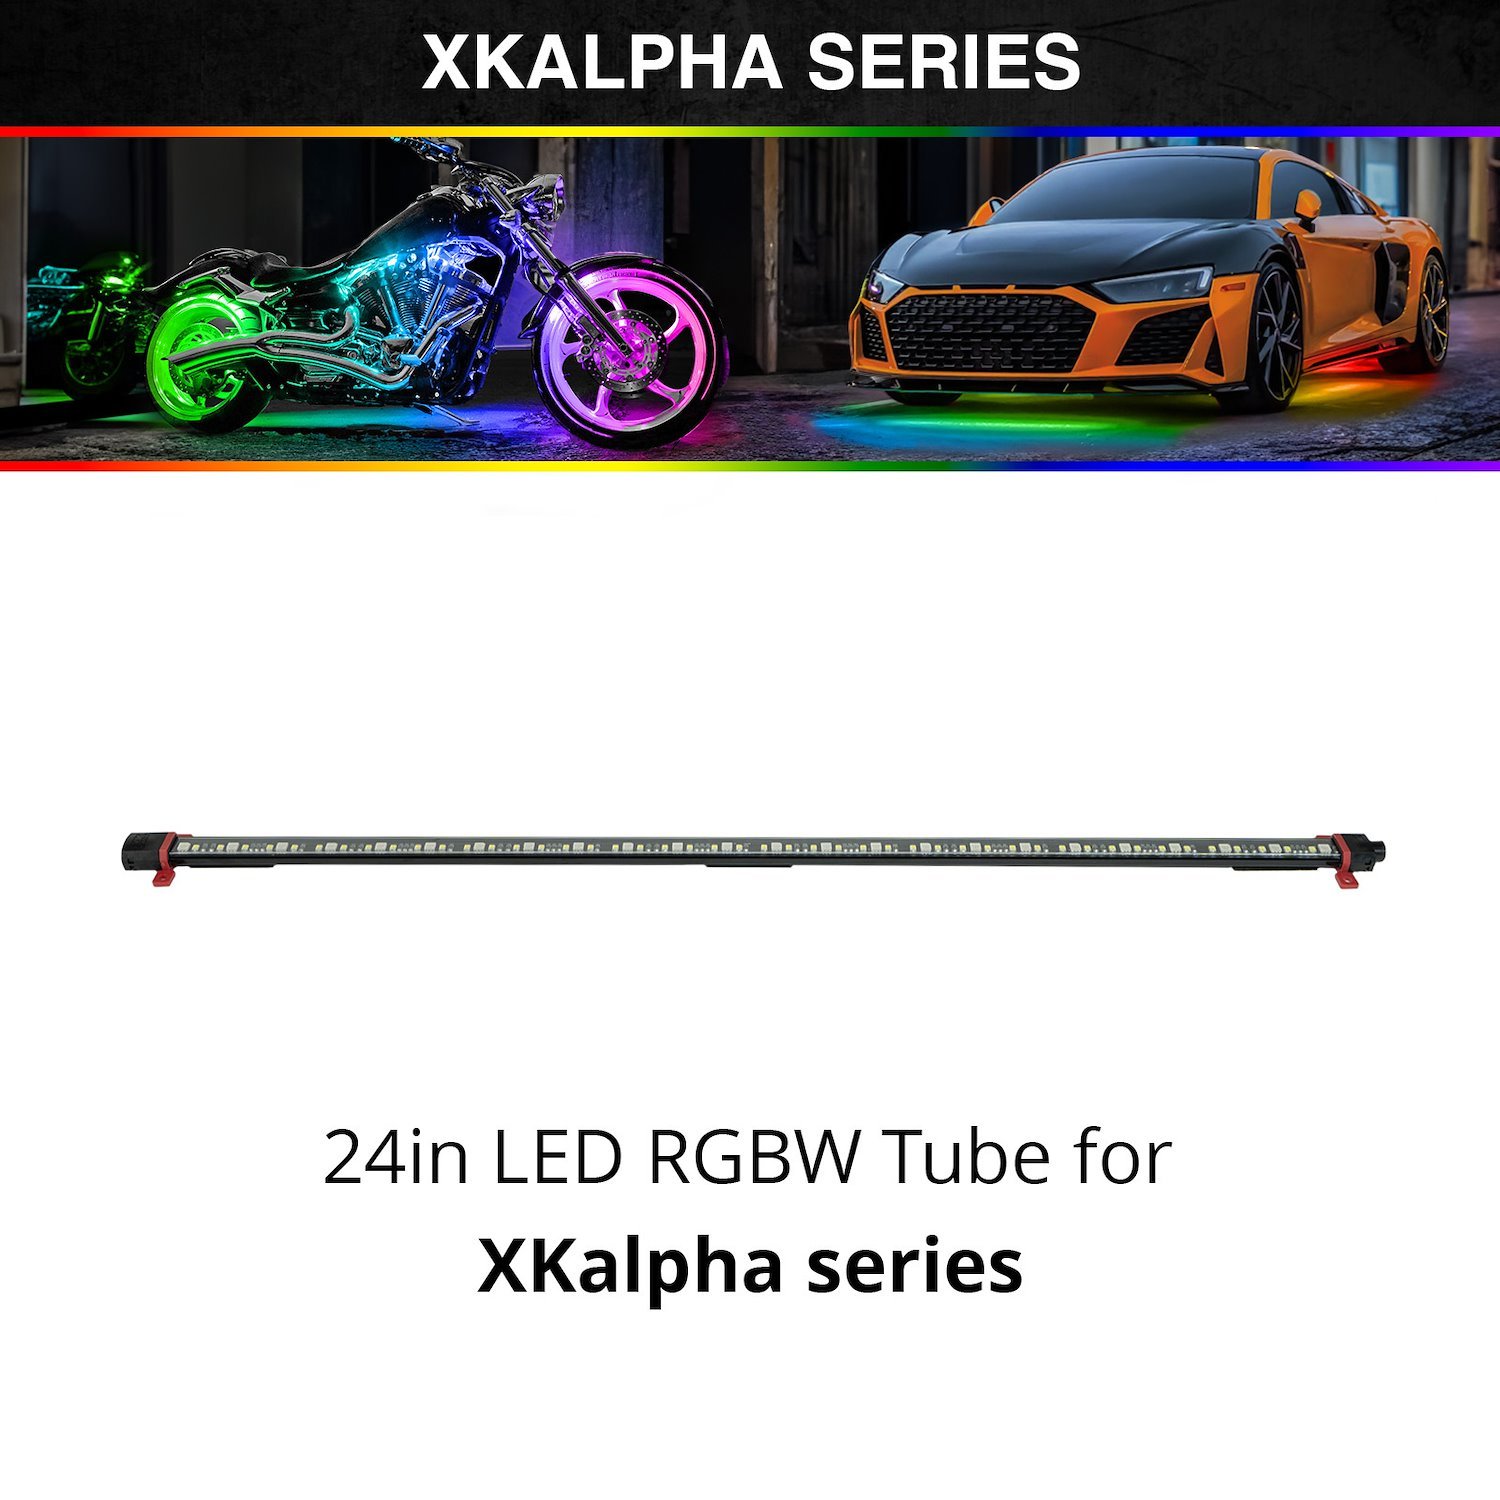 AP-T-24 LED RGBW Tube, XKalpha, 24 in., Universal Fit